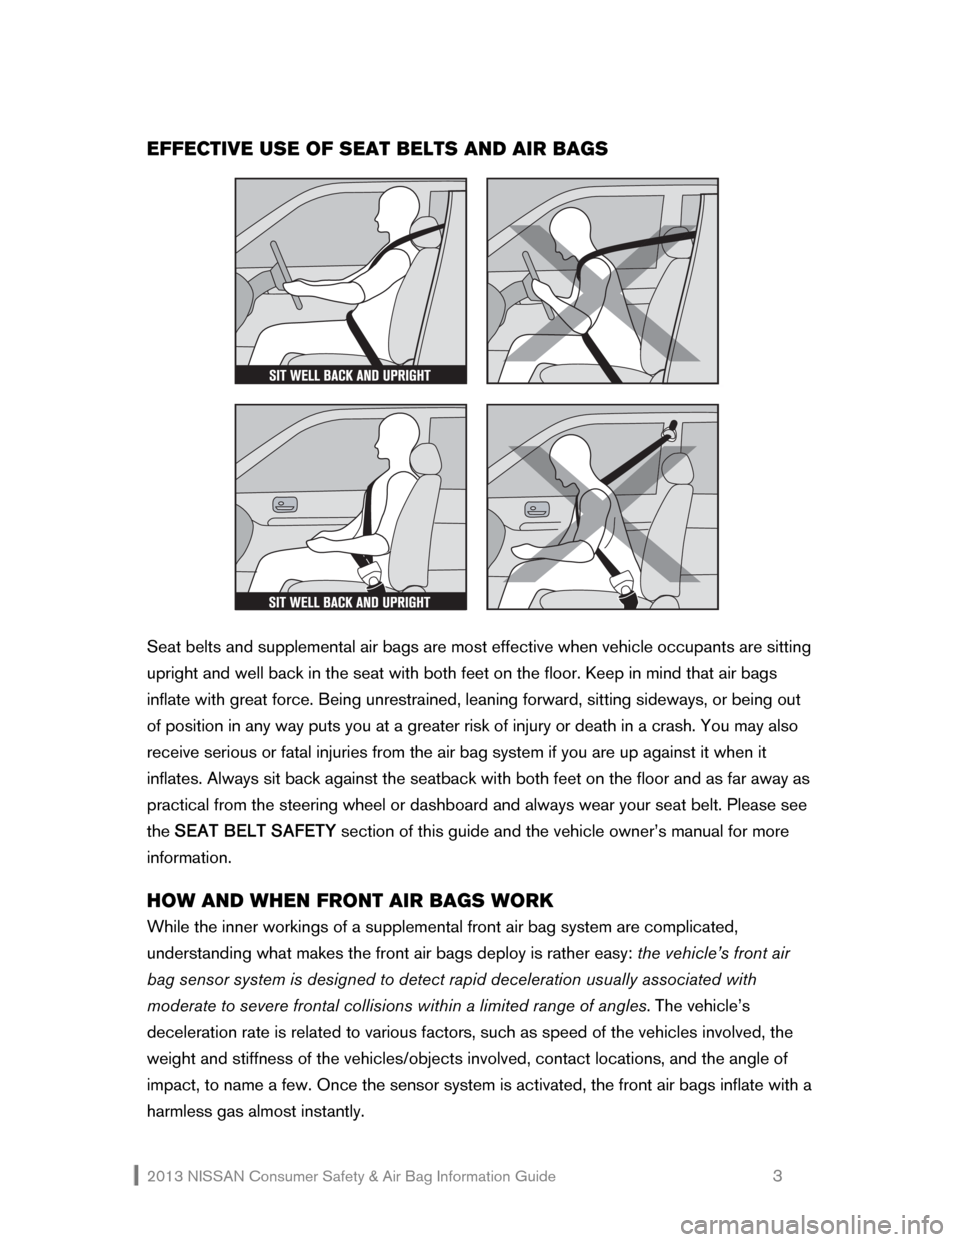 NISSAN ALTIMA 2013 L33 / 5.G Consumer Safety Air Bag Information Guide 2013 NISSAN Consumer Safety & Air Bag Information Guide                                                   3 
EFFECTIVE USE OF SEAT BELTS AND AIR BAGS 
 
 
 
Seat belts and supplemental air bags are mo